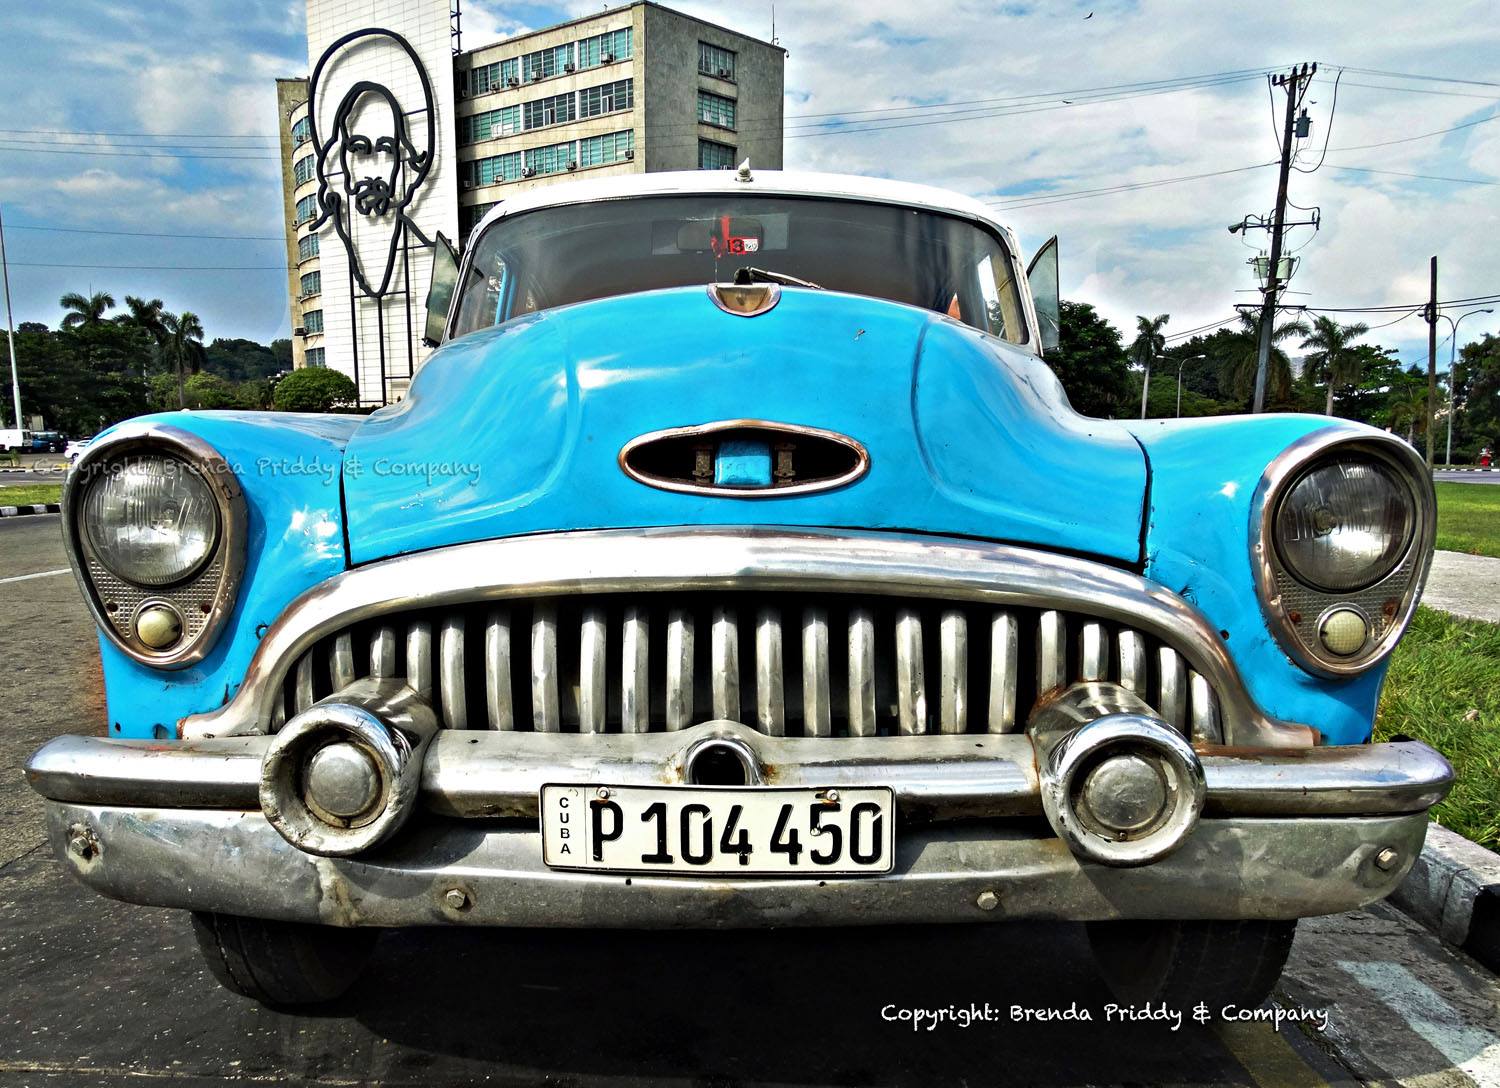 Forget cars and coffee. How about Cars in Cuba?